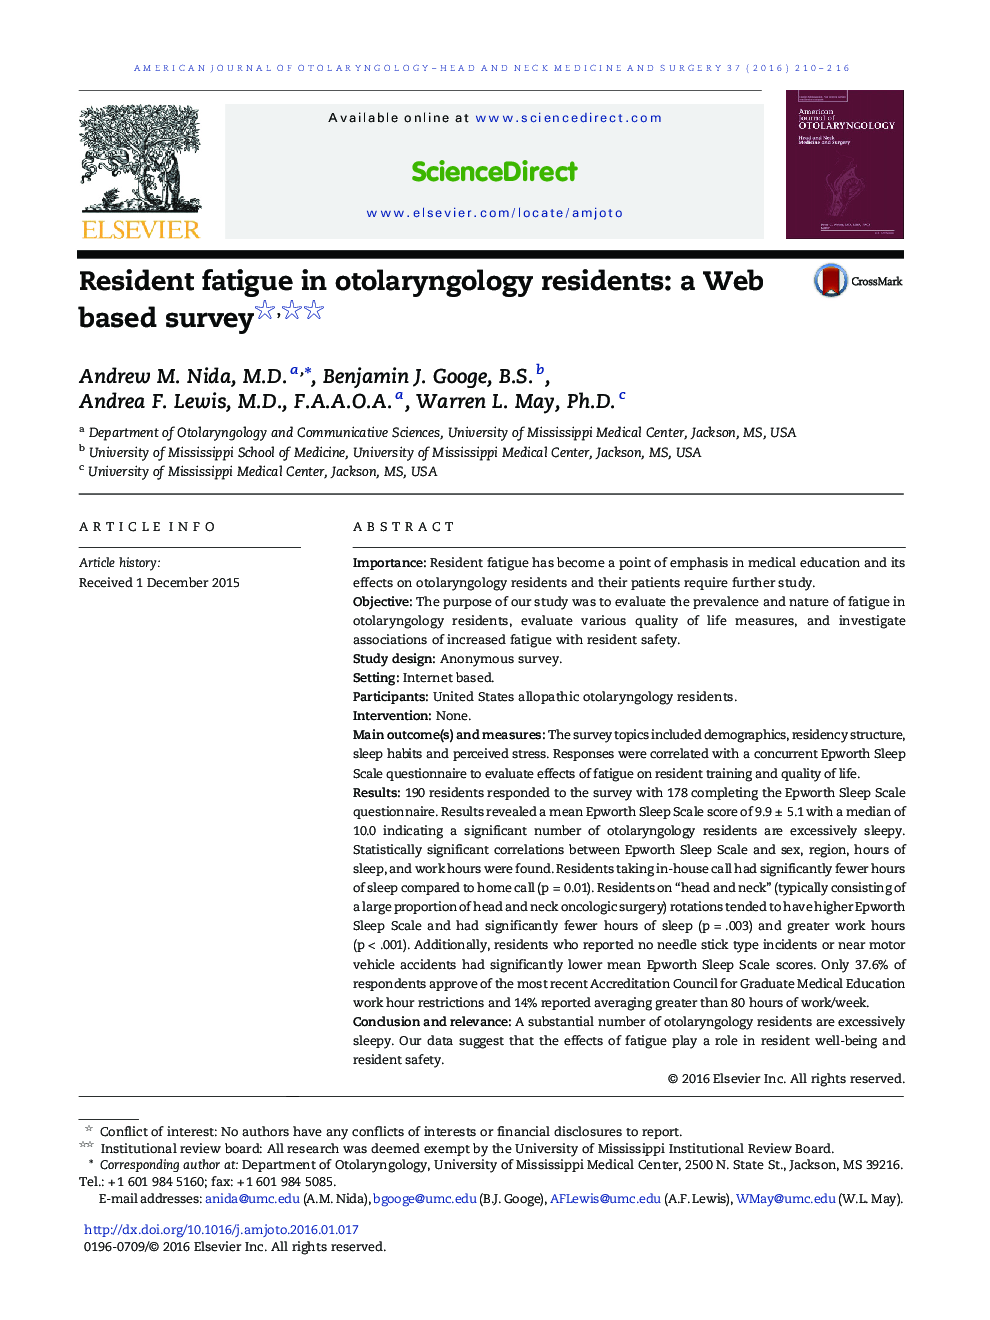 Resident fatigue in otolaryngology residents: a Web based survey 